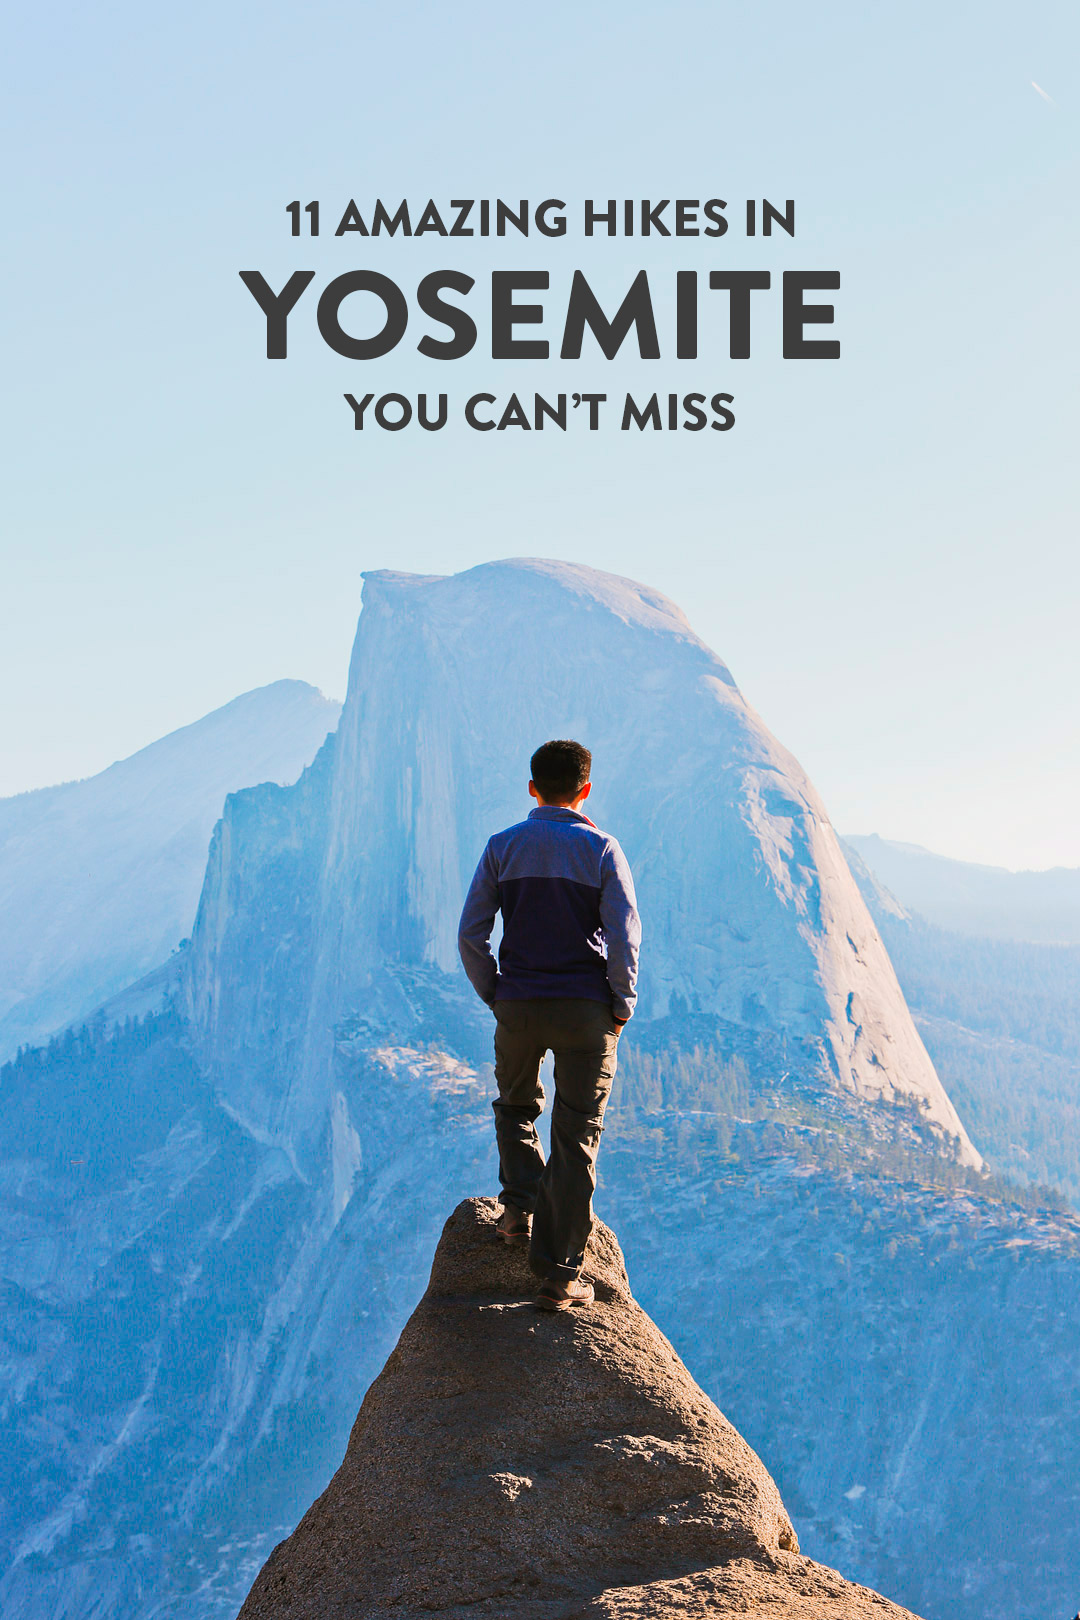 Taking a trip to Yosemite National Park? Save this pin and click to see details on the 11 best hikes in Yosemite National Park you can’t miss. These Yosemite hiking trails are also some of the best hikes in California and the US that you’ll want to add to your hiking bucket lists. They take you to the park’s most beautiful places and scenic views. // Local Adventurer #localadventurer #yosemite #california #nationalpark #visitcalifornia #visitca #findyourpark